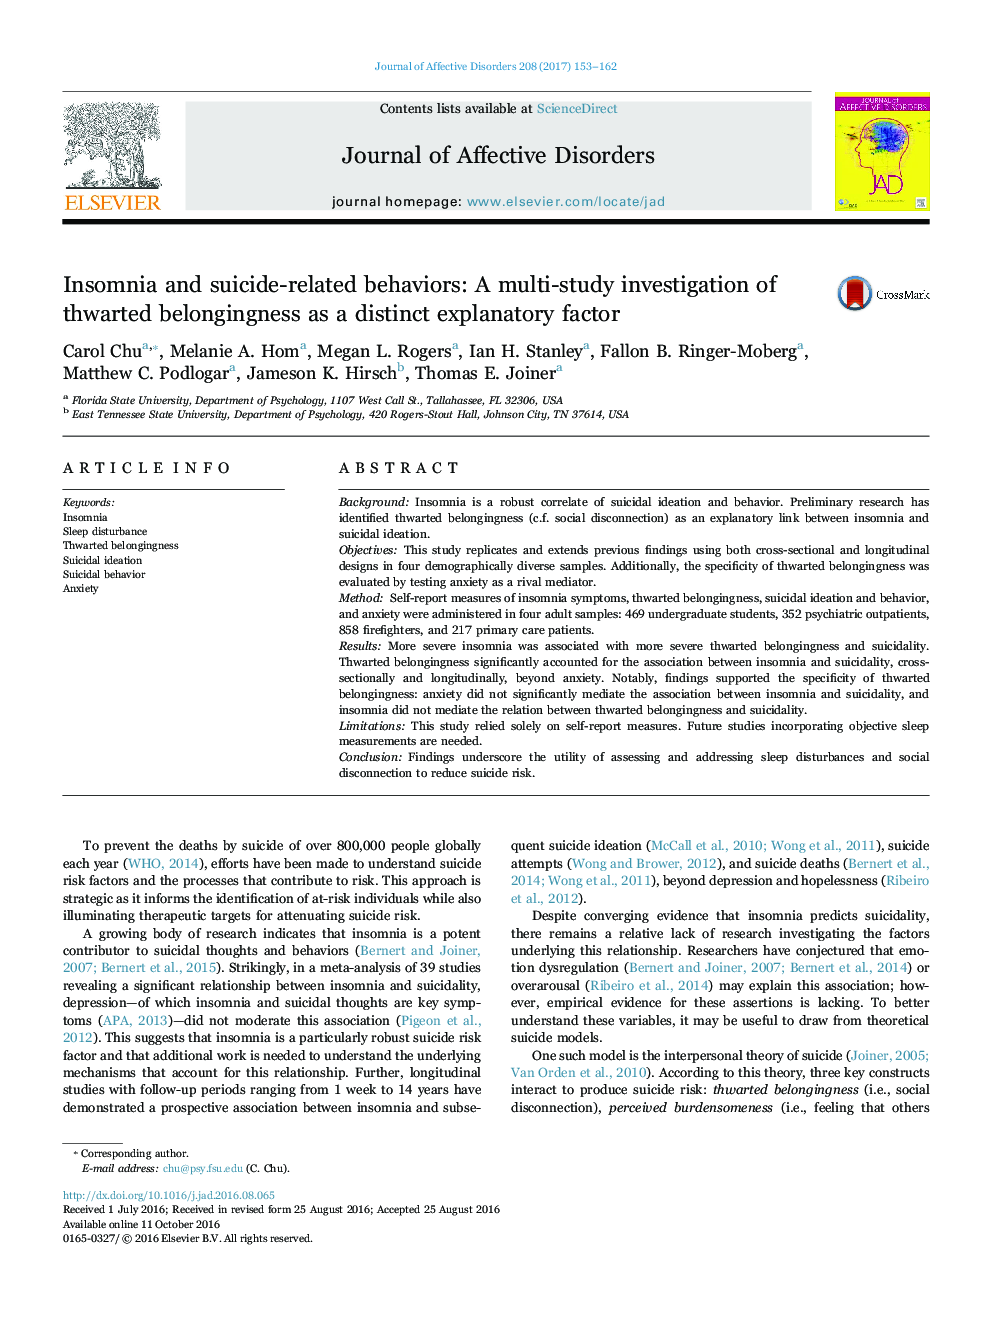 Insomnia and suicide-related behaviors: A multi-study investigation of thwarted belongingness as a distinct explanatory factor